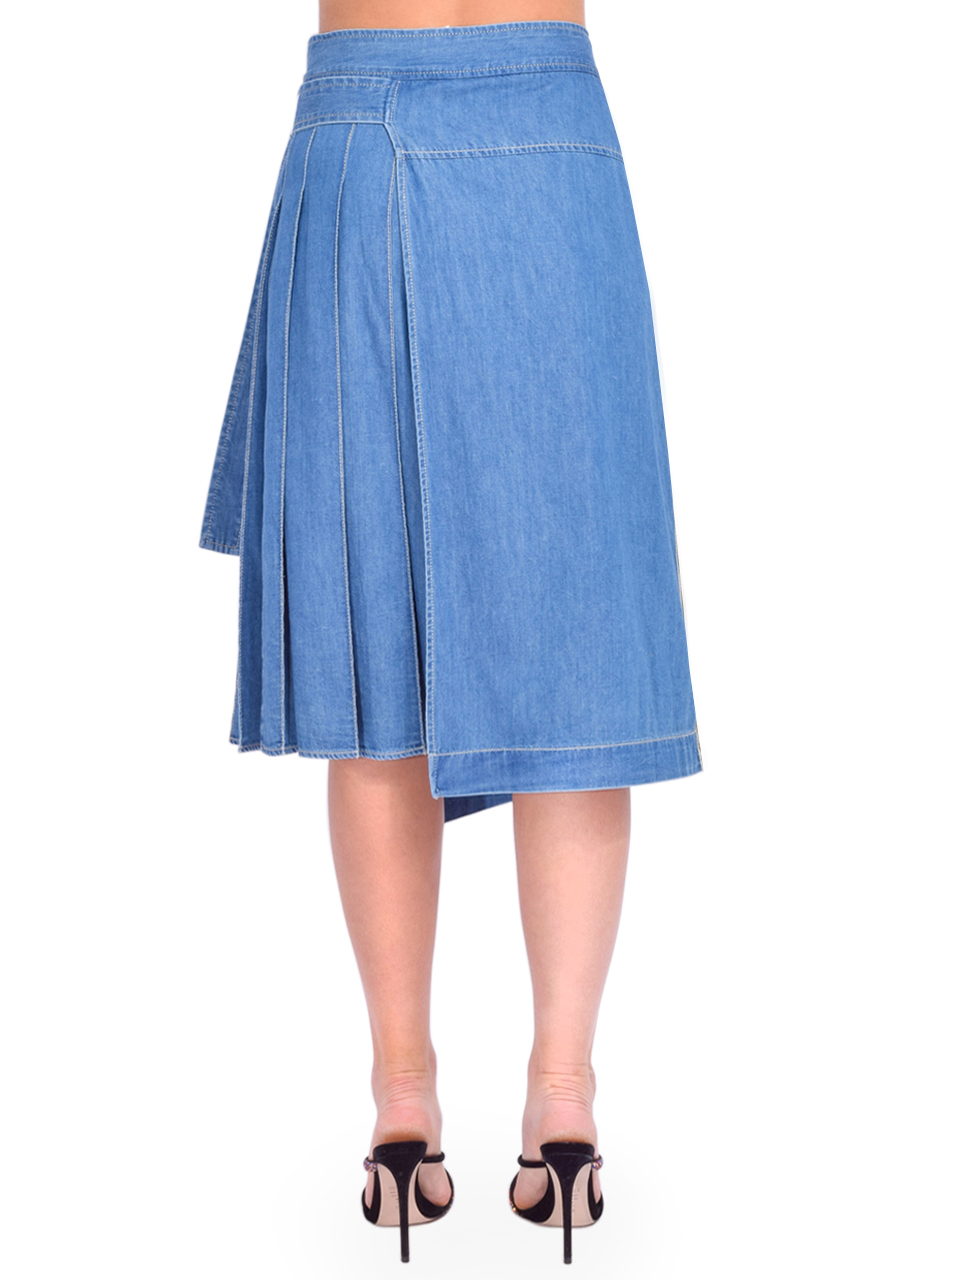 3.1 Phillip Lim Chambray Pleated Wrap Skirt in Indigo Back View 